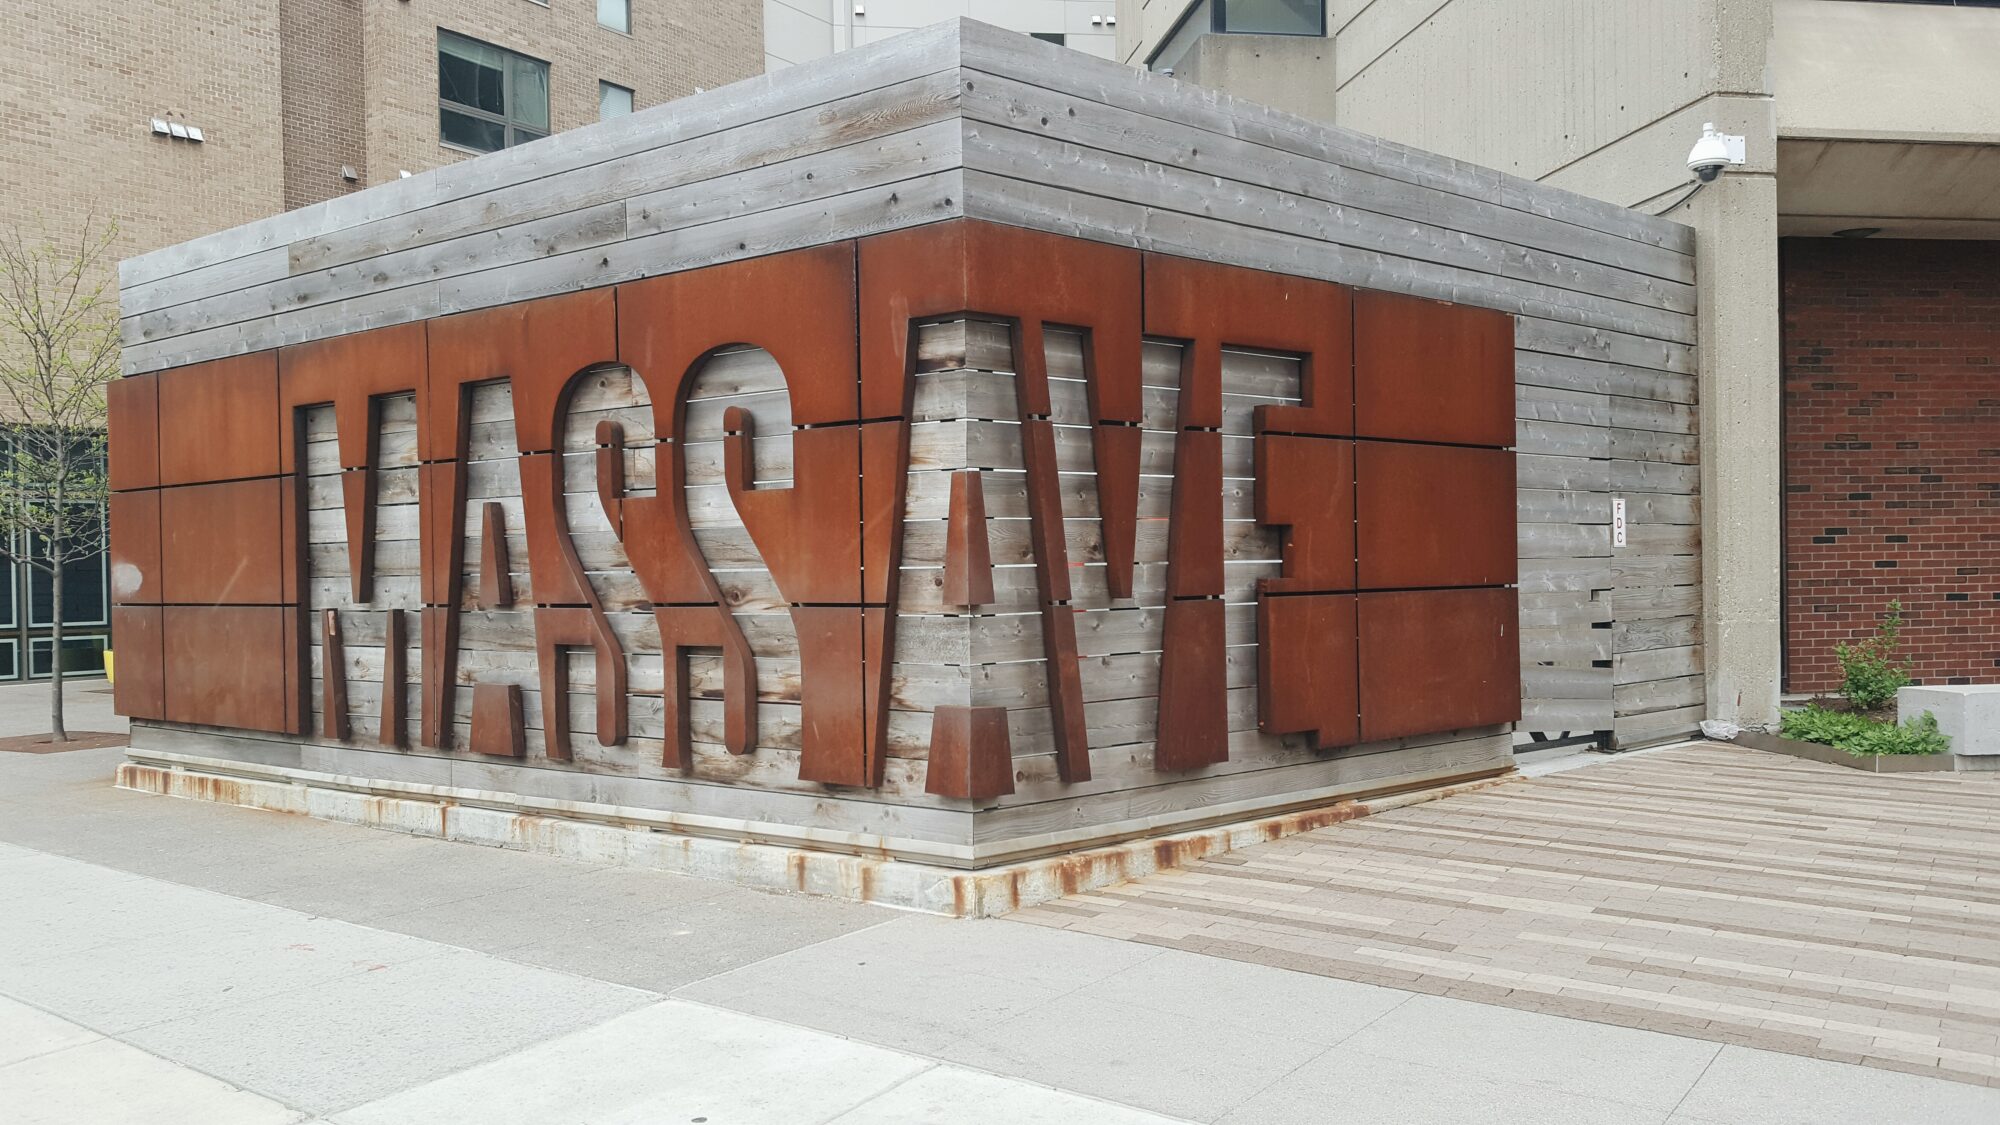 A large wraparound sign reads "MASS AVE"